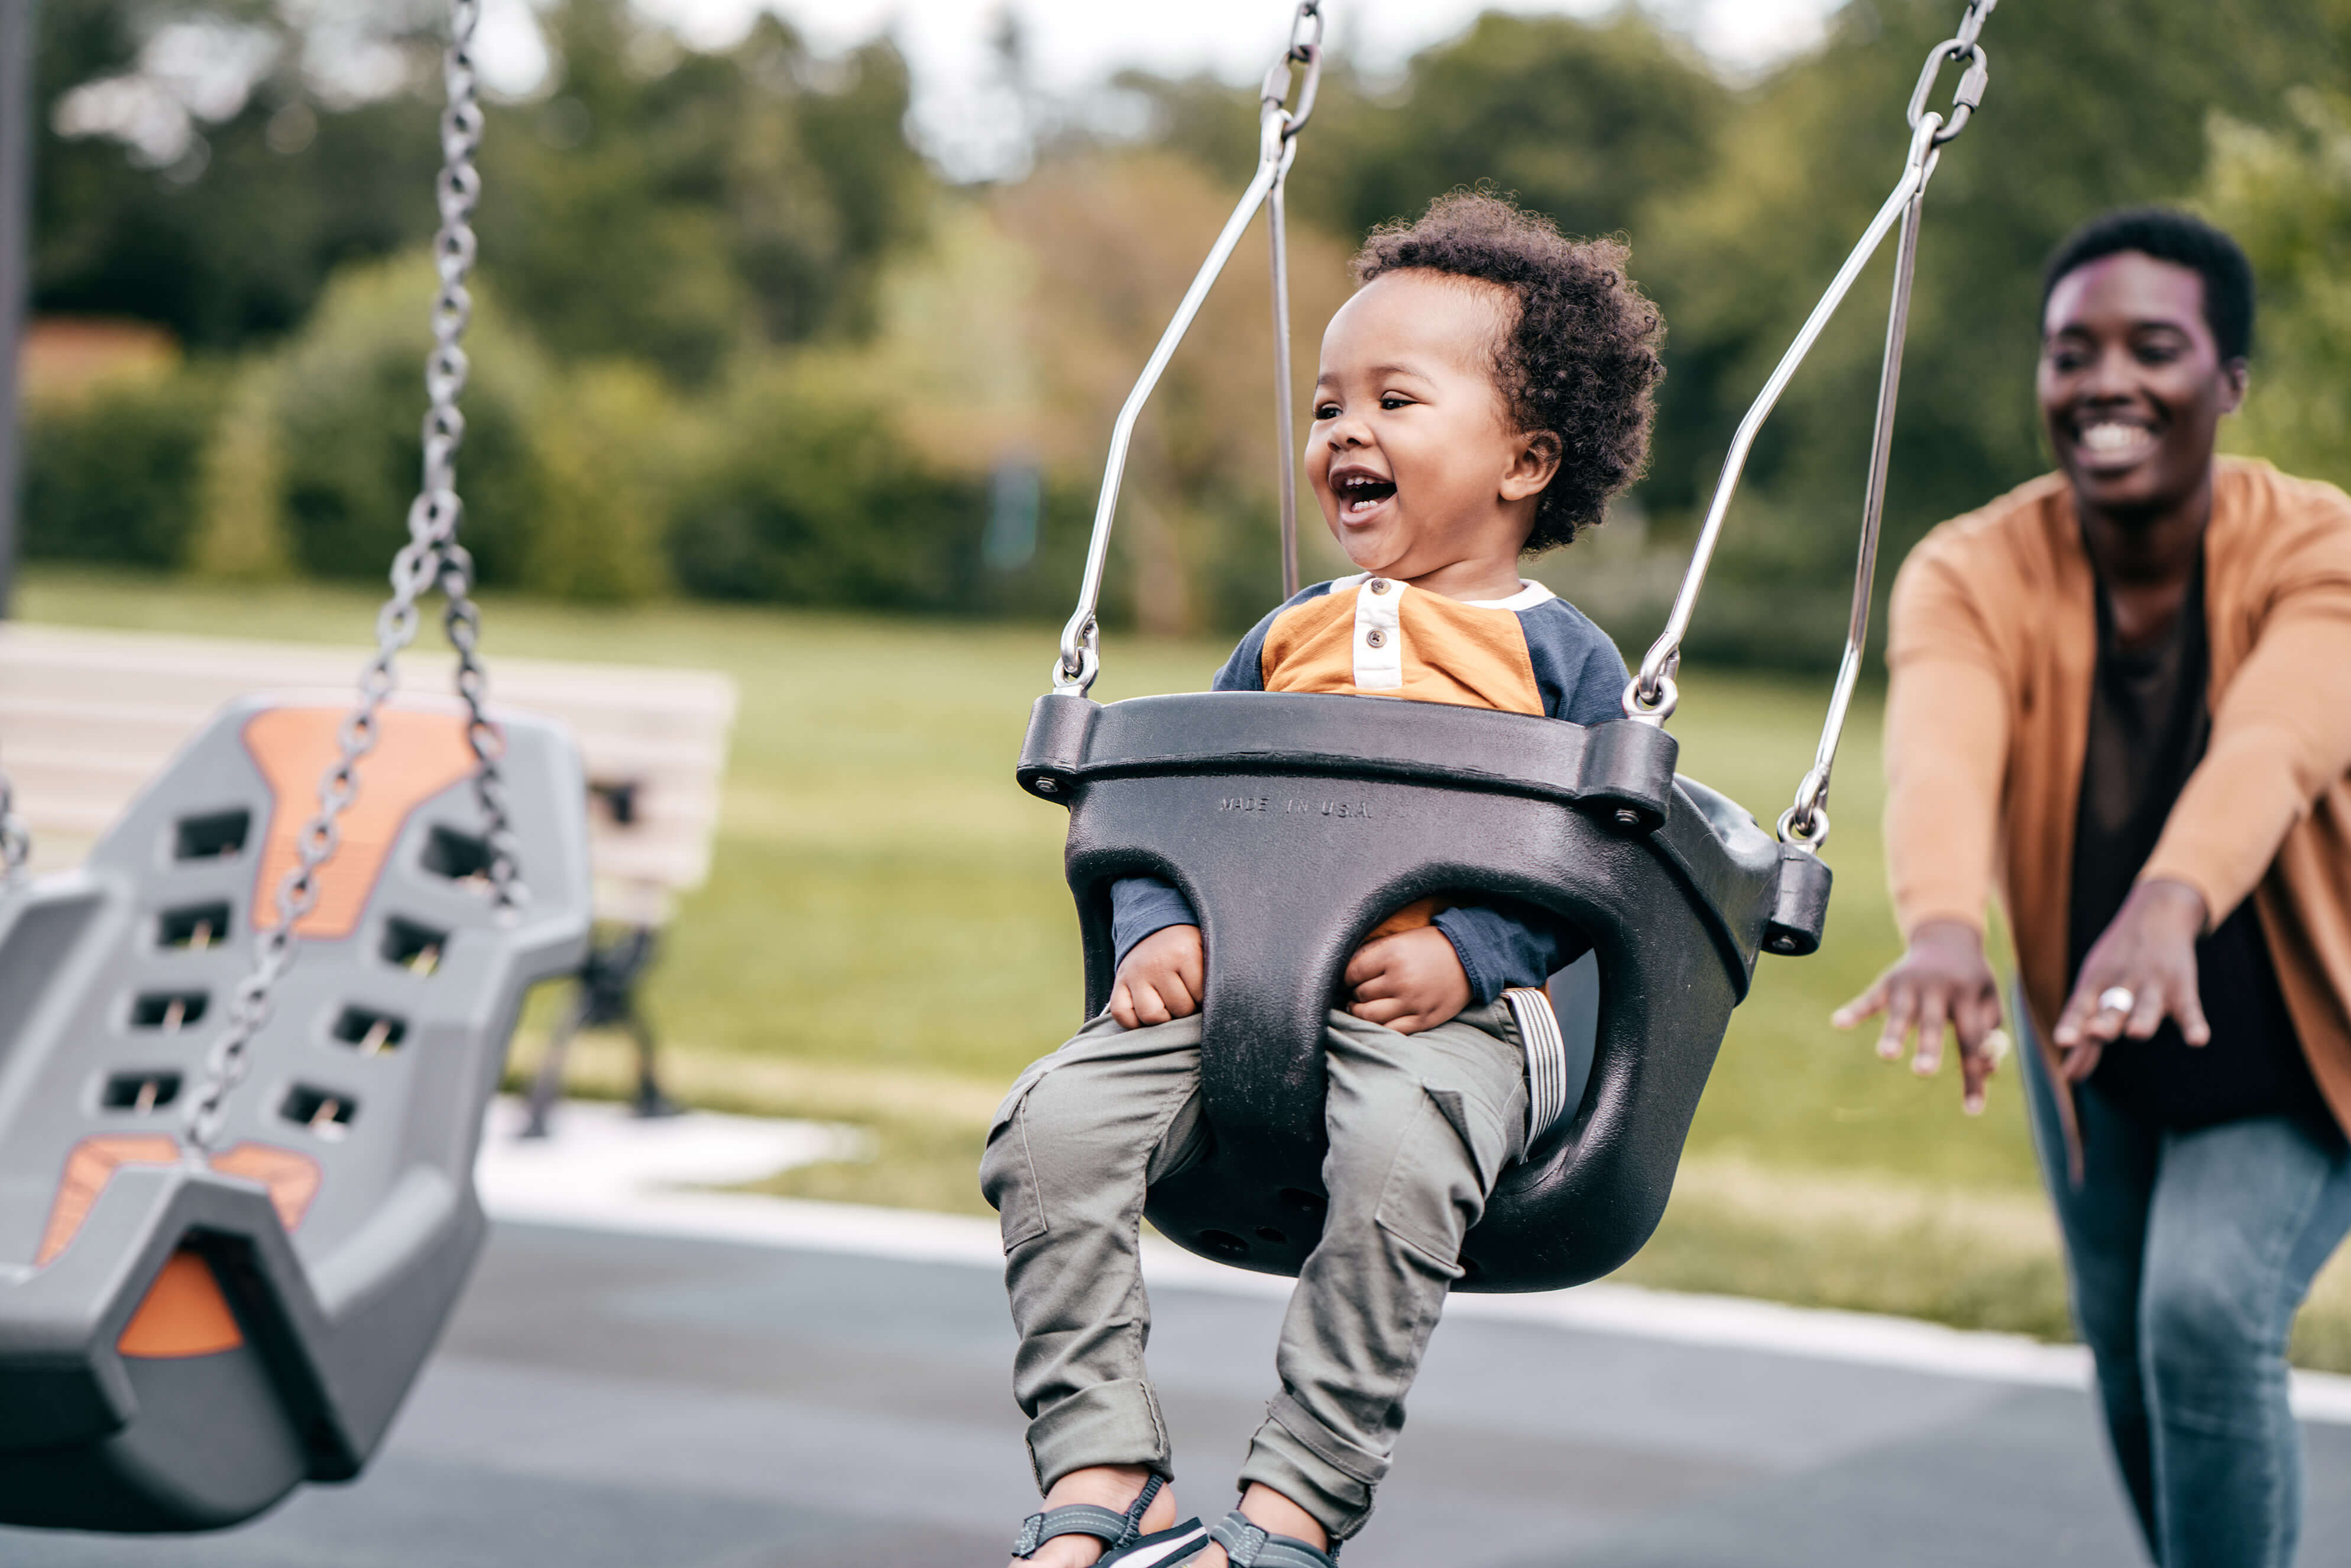 A woman pushing her child on a swing